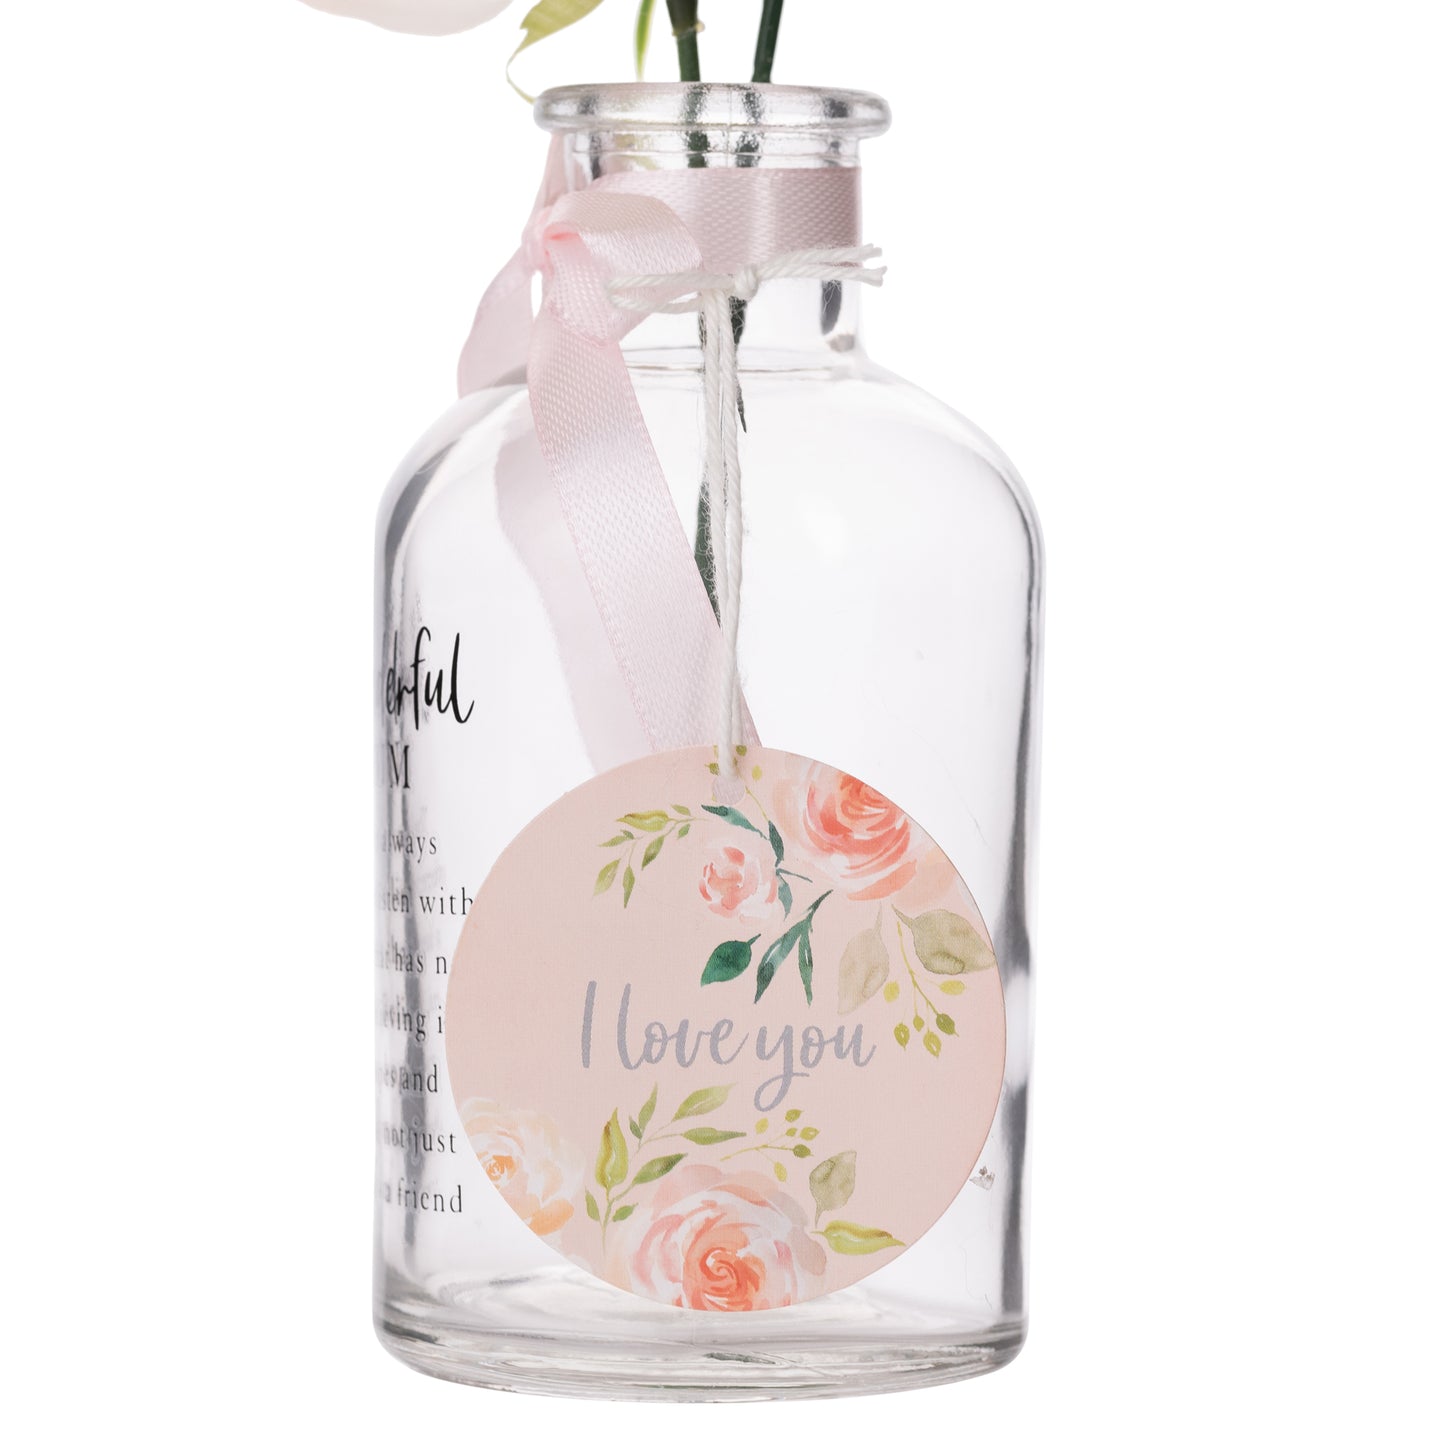 Lovely Nan Flower In A Glass Jar With Message